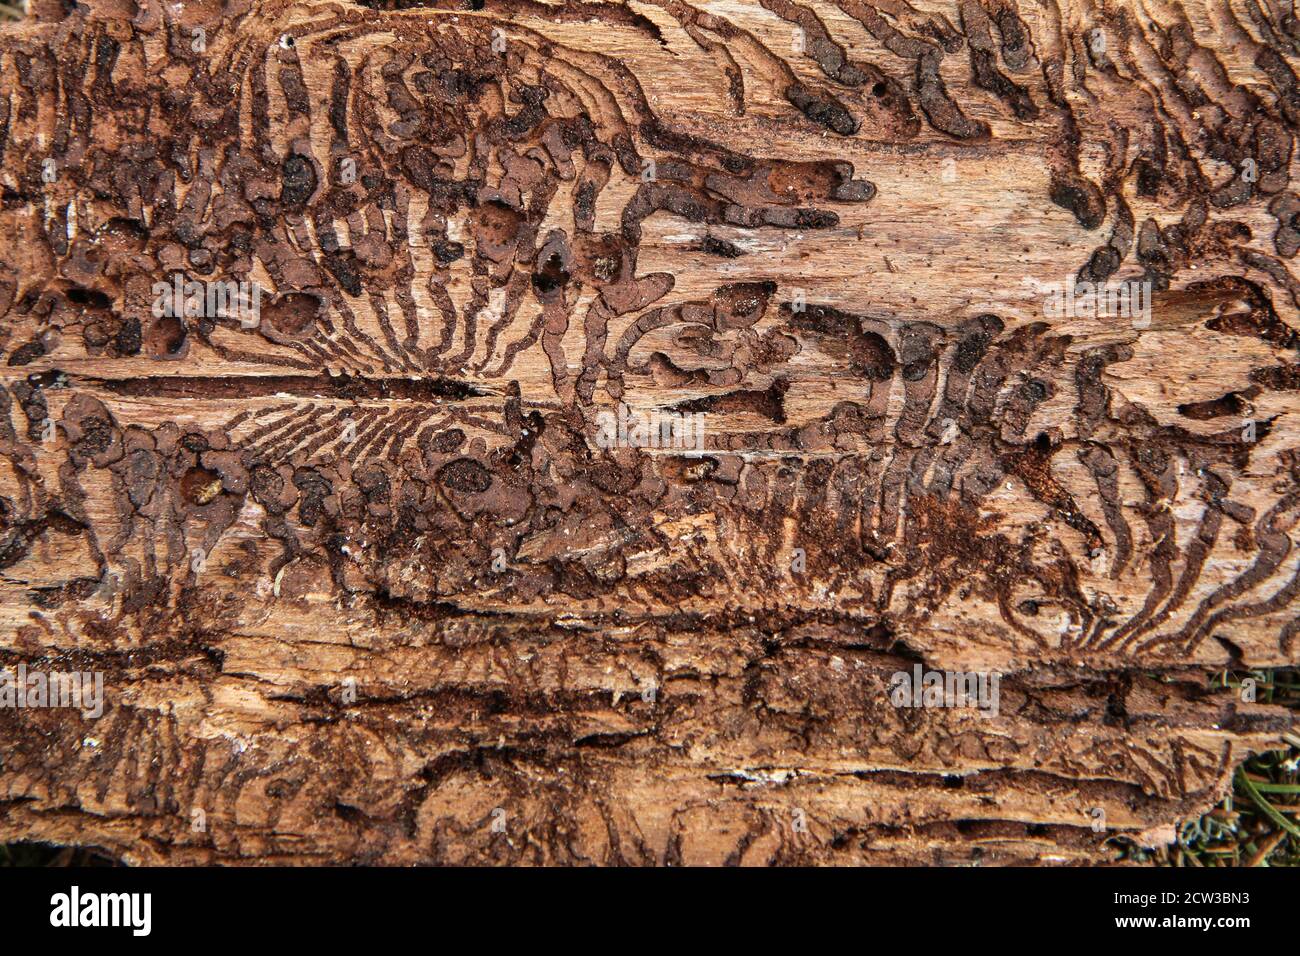 The detail of the bark of the tree infested by bark beetle. Stock Photo